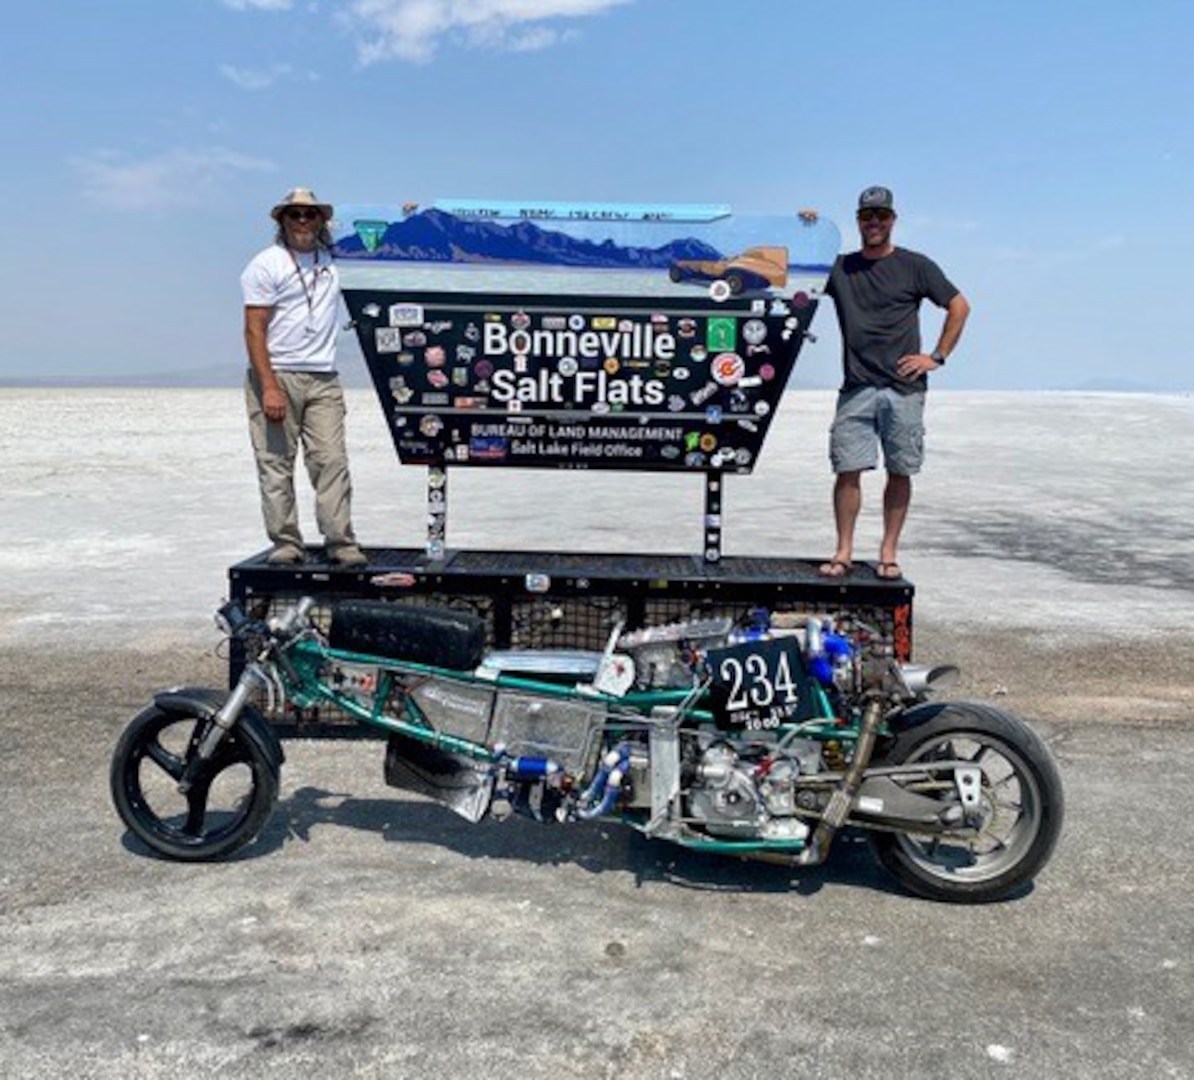 Jaron Tyner with his teammate and cousin Tyrell Marlow and their custom-built motorcycle, the Coconut Express